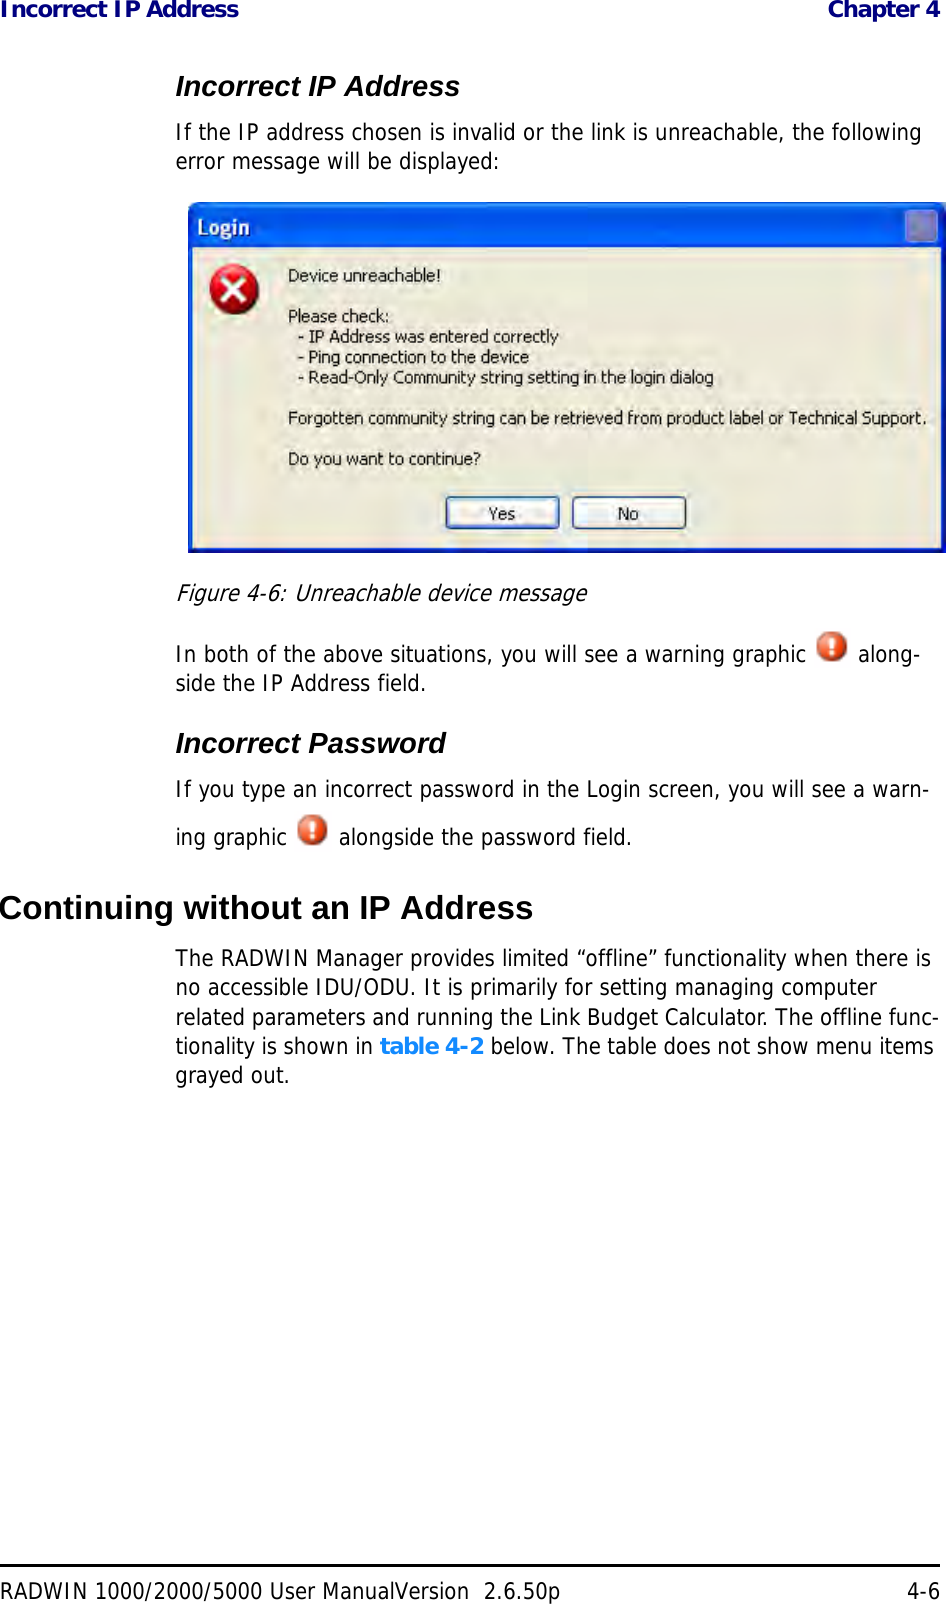 Incorrect IP Address  Chapter 4RADWIN 1000/2000/5000 User ManualVersion  2.6.50p 4-6Incorrect IP AddressIf the IP address chosen is invalid or the link is unreachable, the following error message will be displayed:Figure 4-6: Unreachable device messageIn both of the above situations, you will see a warning graphic   along-side the IP Address field.Incorrect PasswordIf you type an incorrect password in the Login screen, you will see a warn-ing graphic   alongside the password field.Continuing without an IP AddressThe RADWIN Manager provides limited “offline” functionality when there is no accessible IDU/ODU. It is primarily for setting managing computer related parameters and running the Link Budget Calculator. The offline func-tionality is shown in table 4-2 below. The table does not show menu items grayed out.